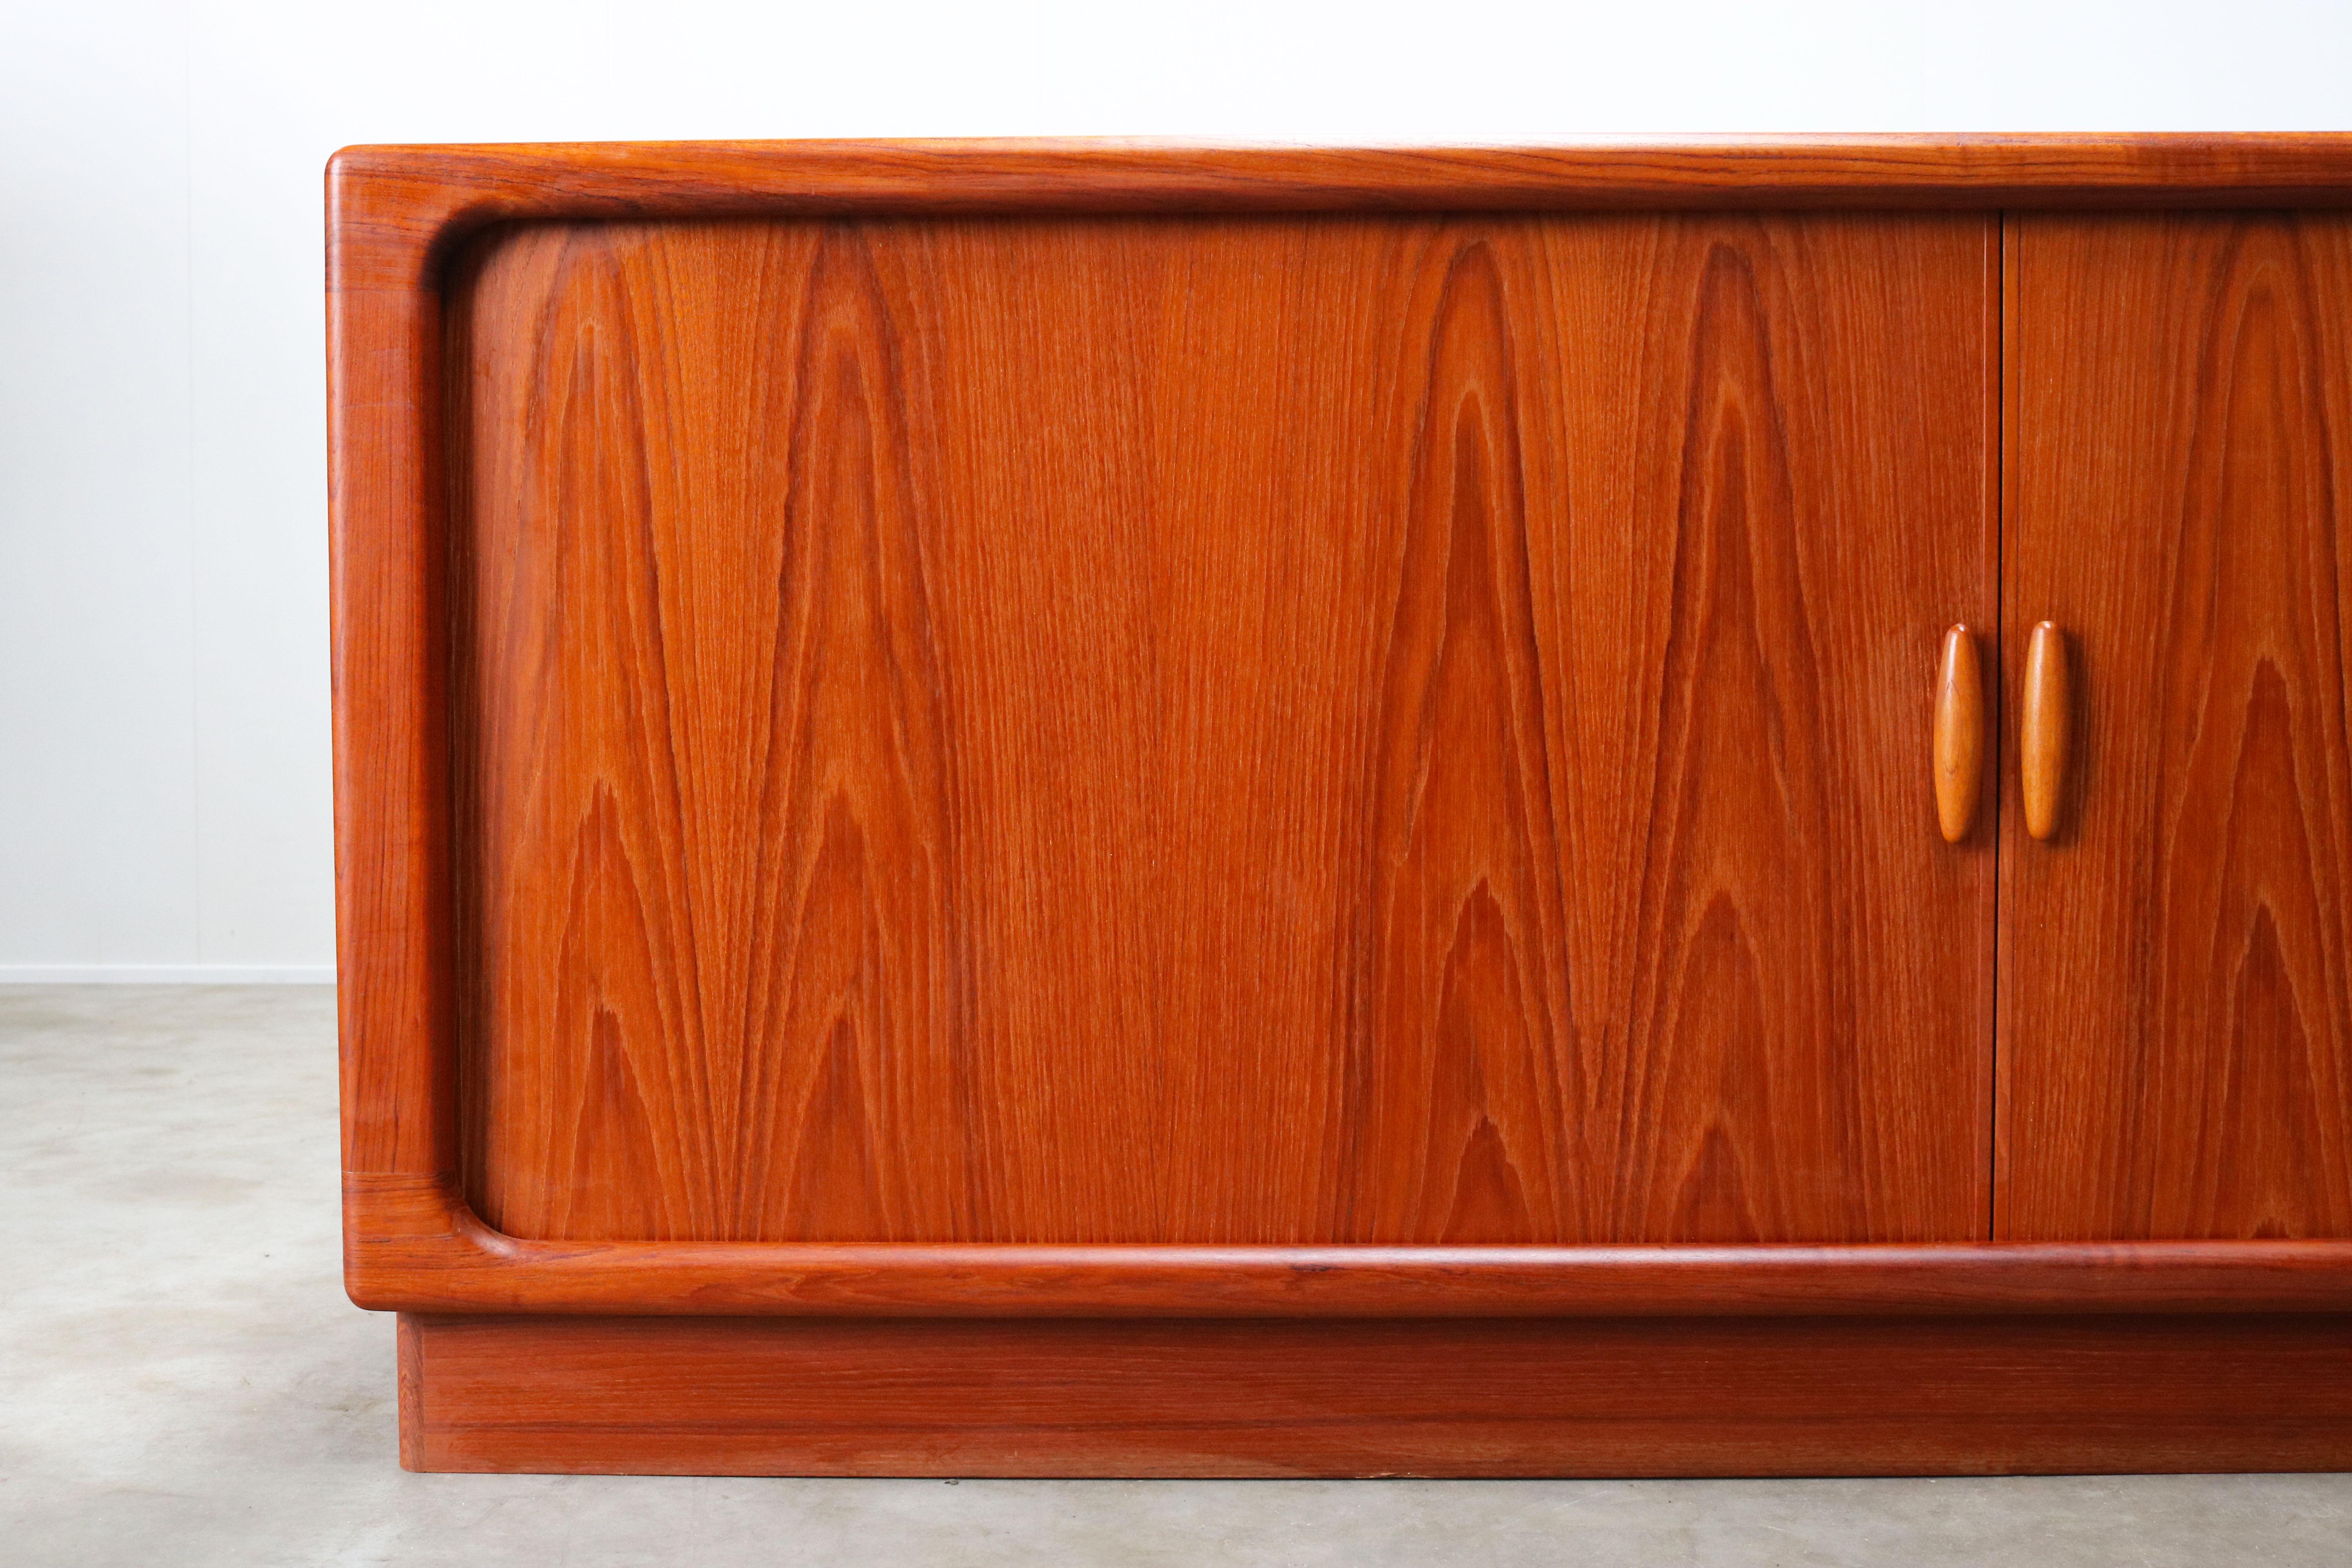 Magnificent Danish design credenza or sideboard designed and produced by the famous Dyrlund furniture makers in the 1950s. Dyrlund is well known for its high quality Danish furniture and this piece perfectly reflects that. The organic shaped wood on